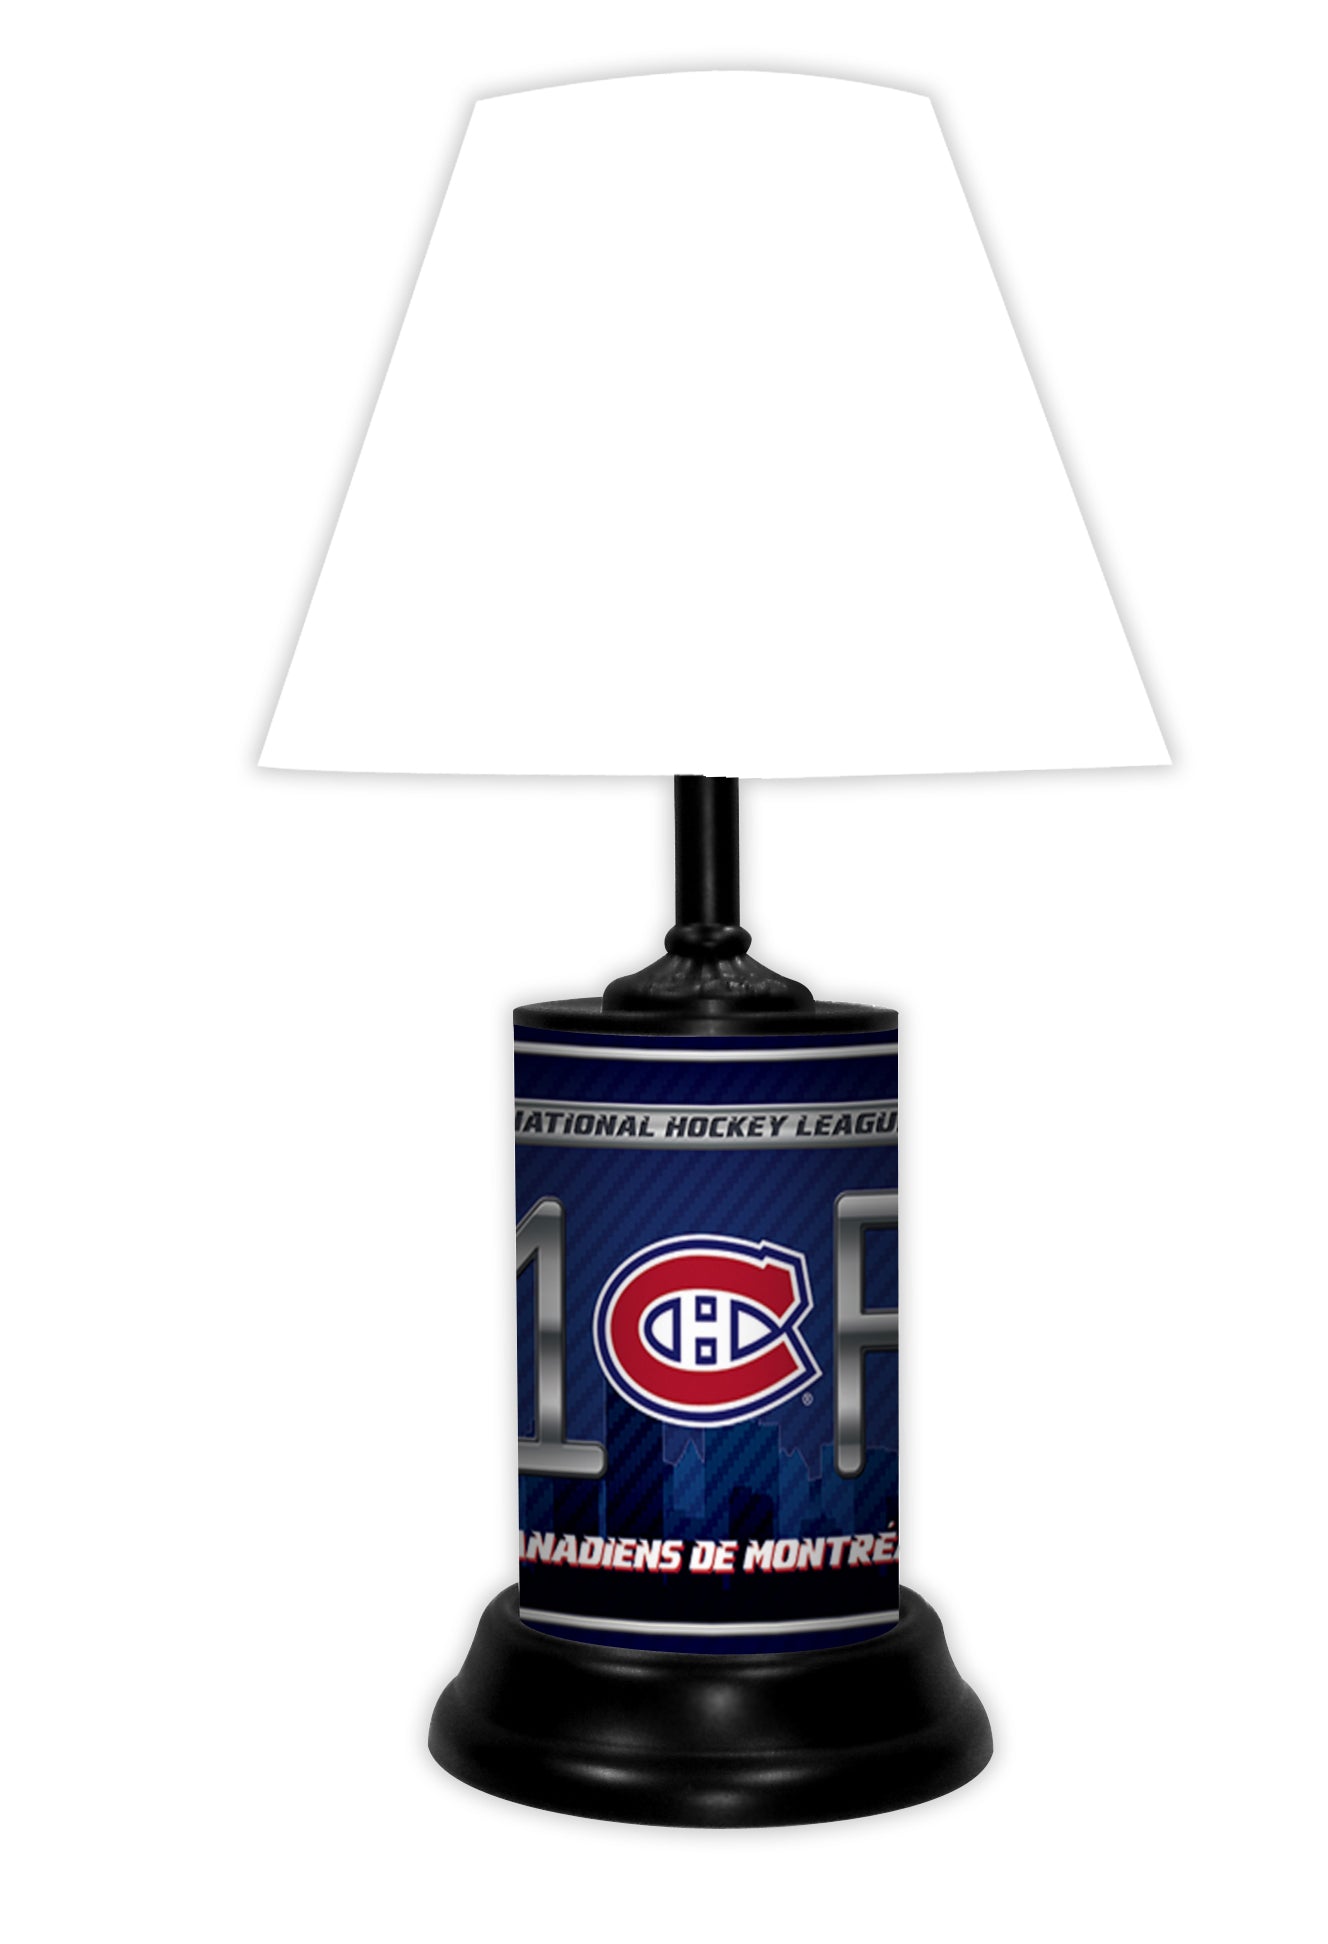 Montreal Canadiens  tabletop lamp featuring team colors, logo and wording "#1 Fan" with black base and white shade